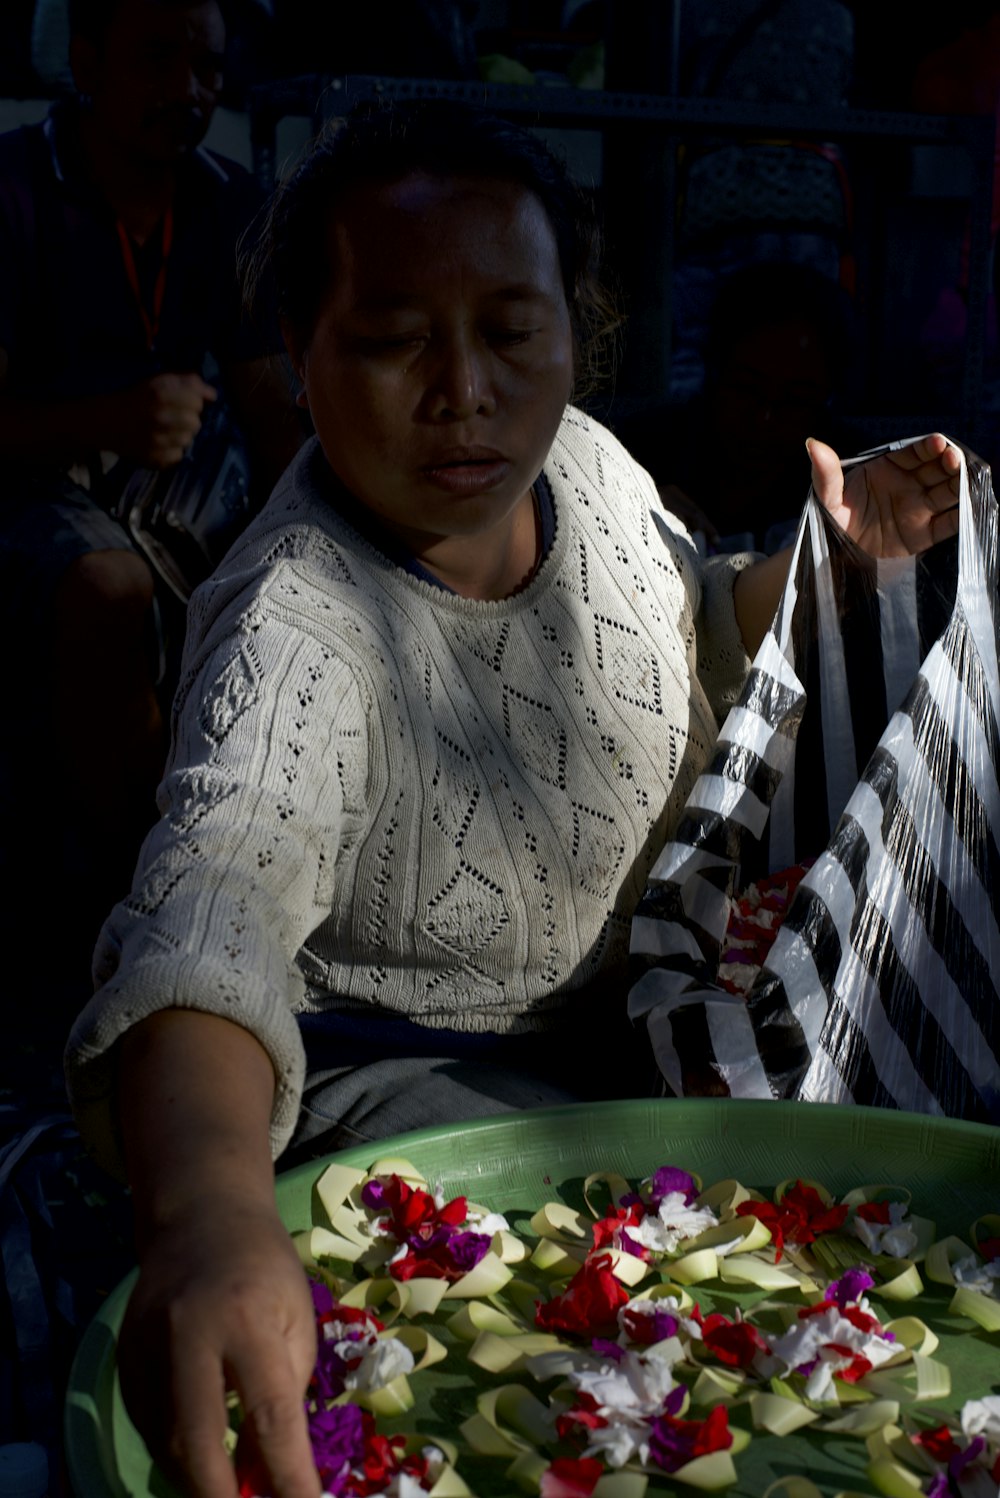 a woman sitting at a table with a plate of food